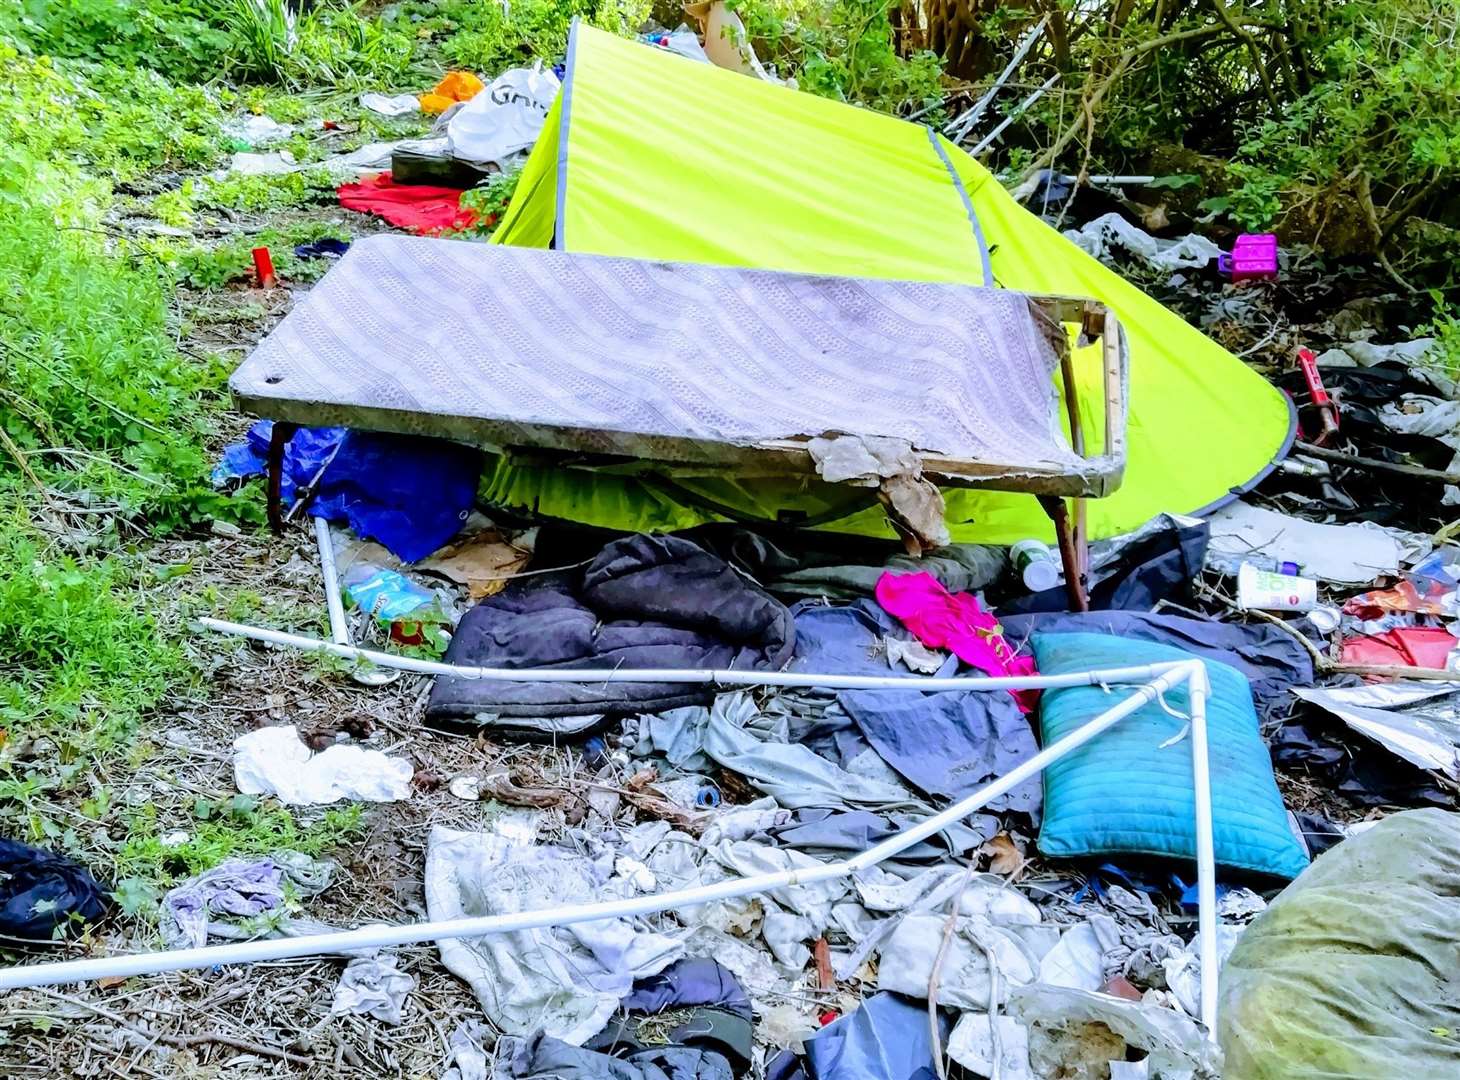 Photos of litter and tents near the Leas Lift Folkestone. Picture: George Bauer